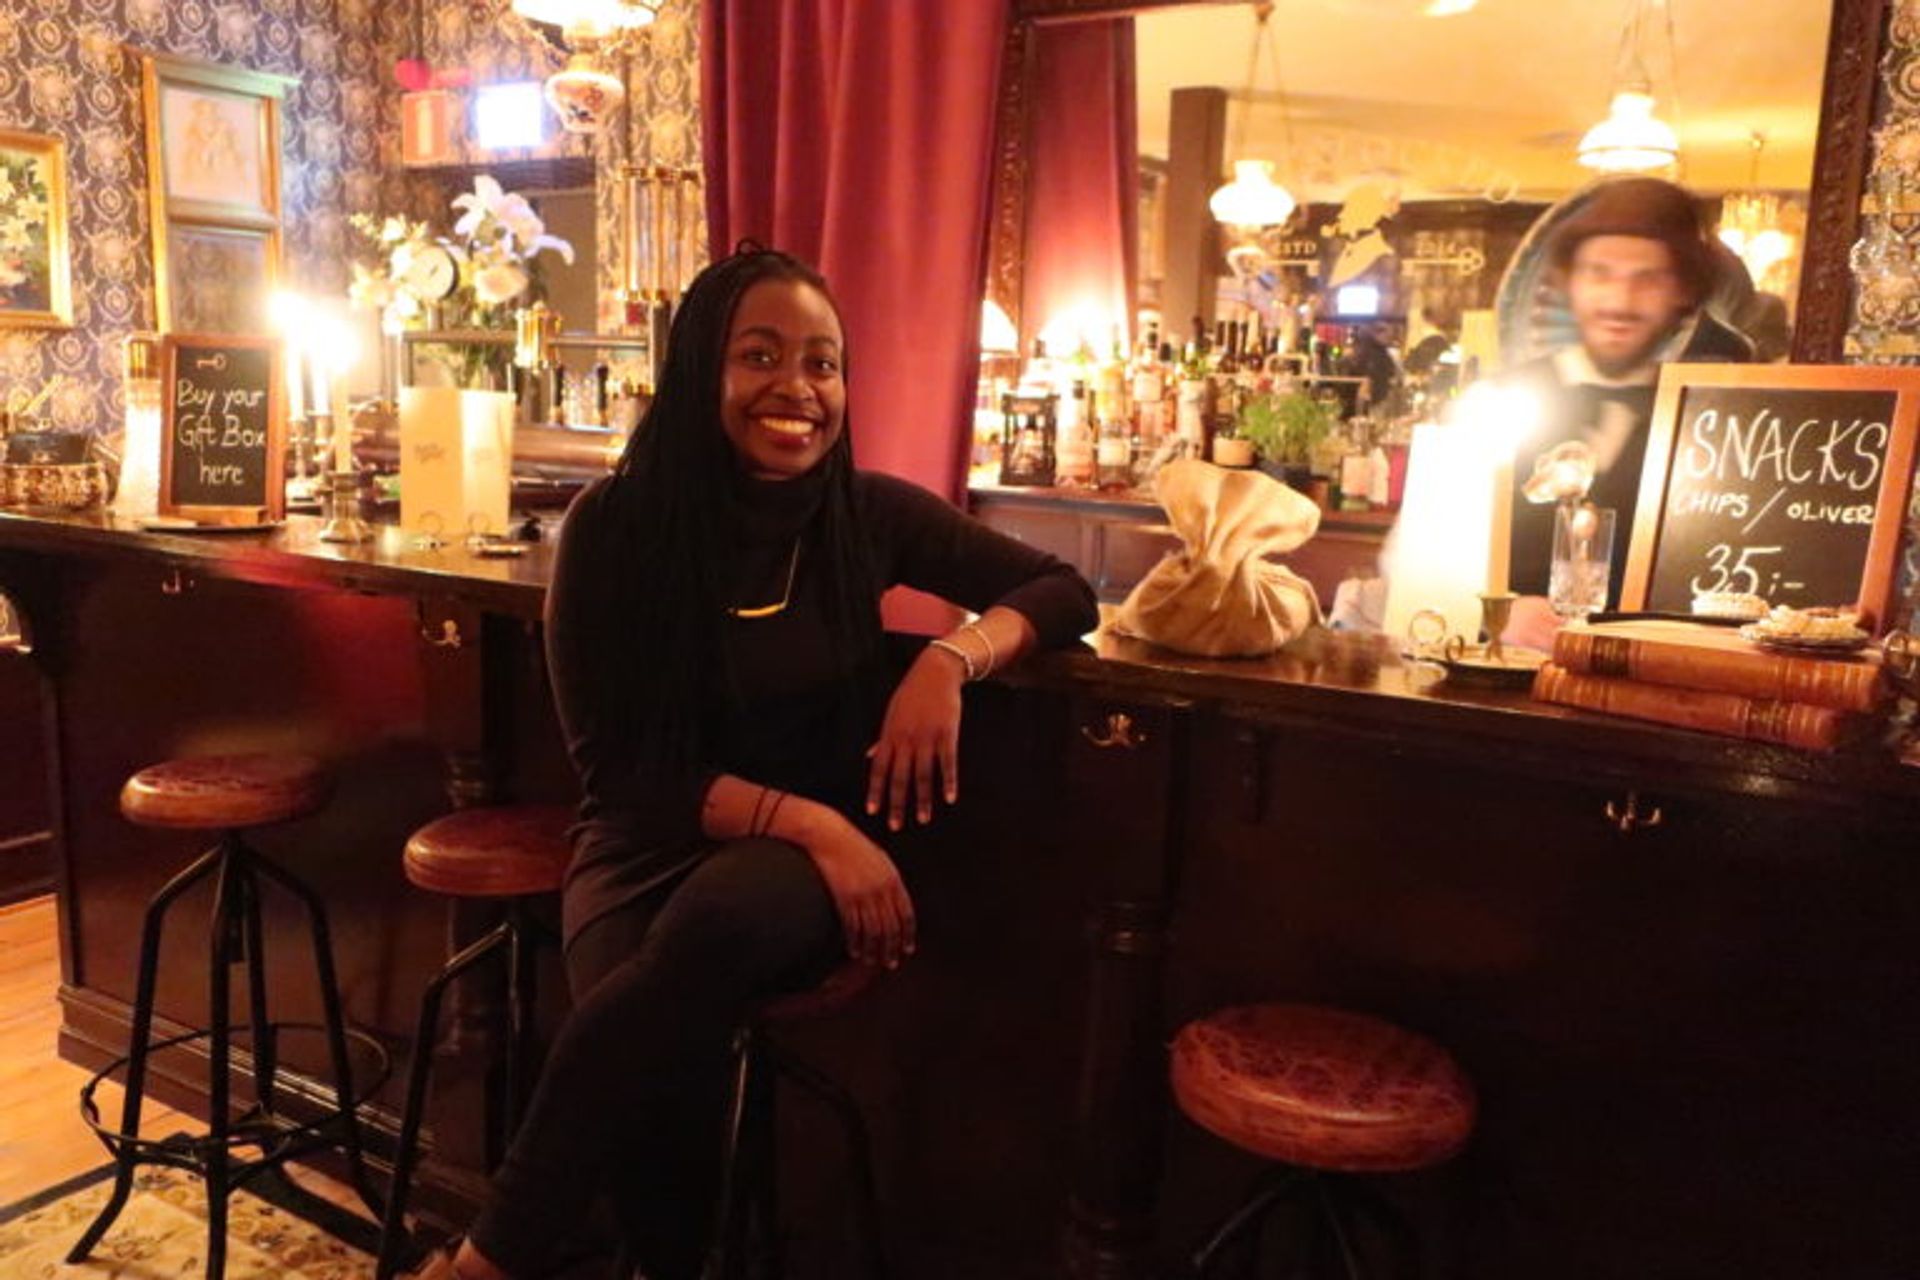 A woman sitting in a bar, she is smiling and look very happy.